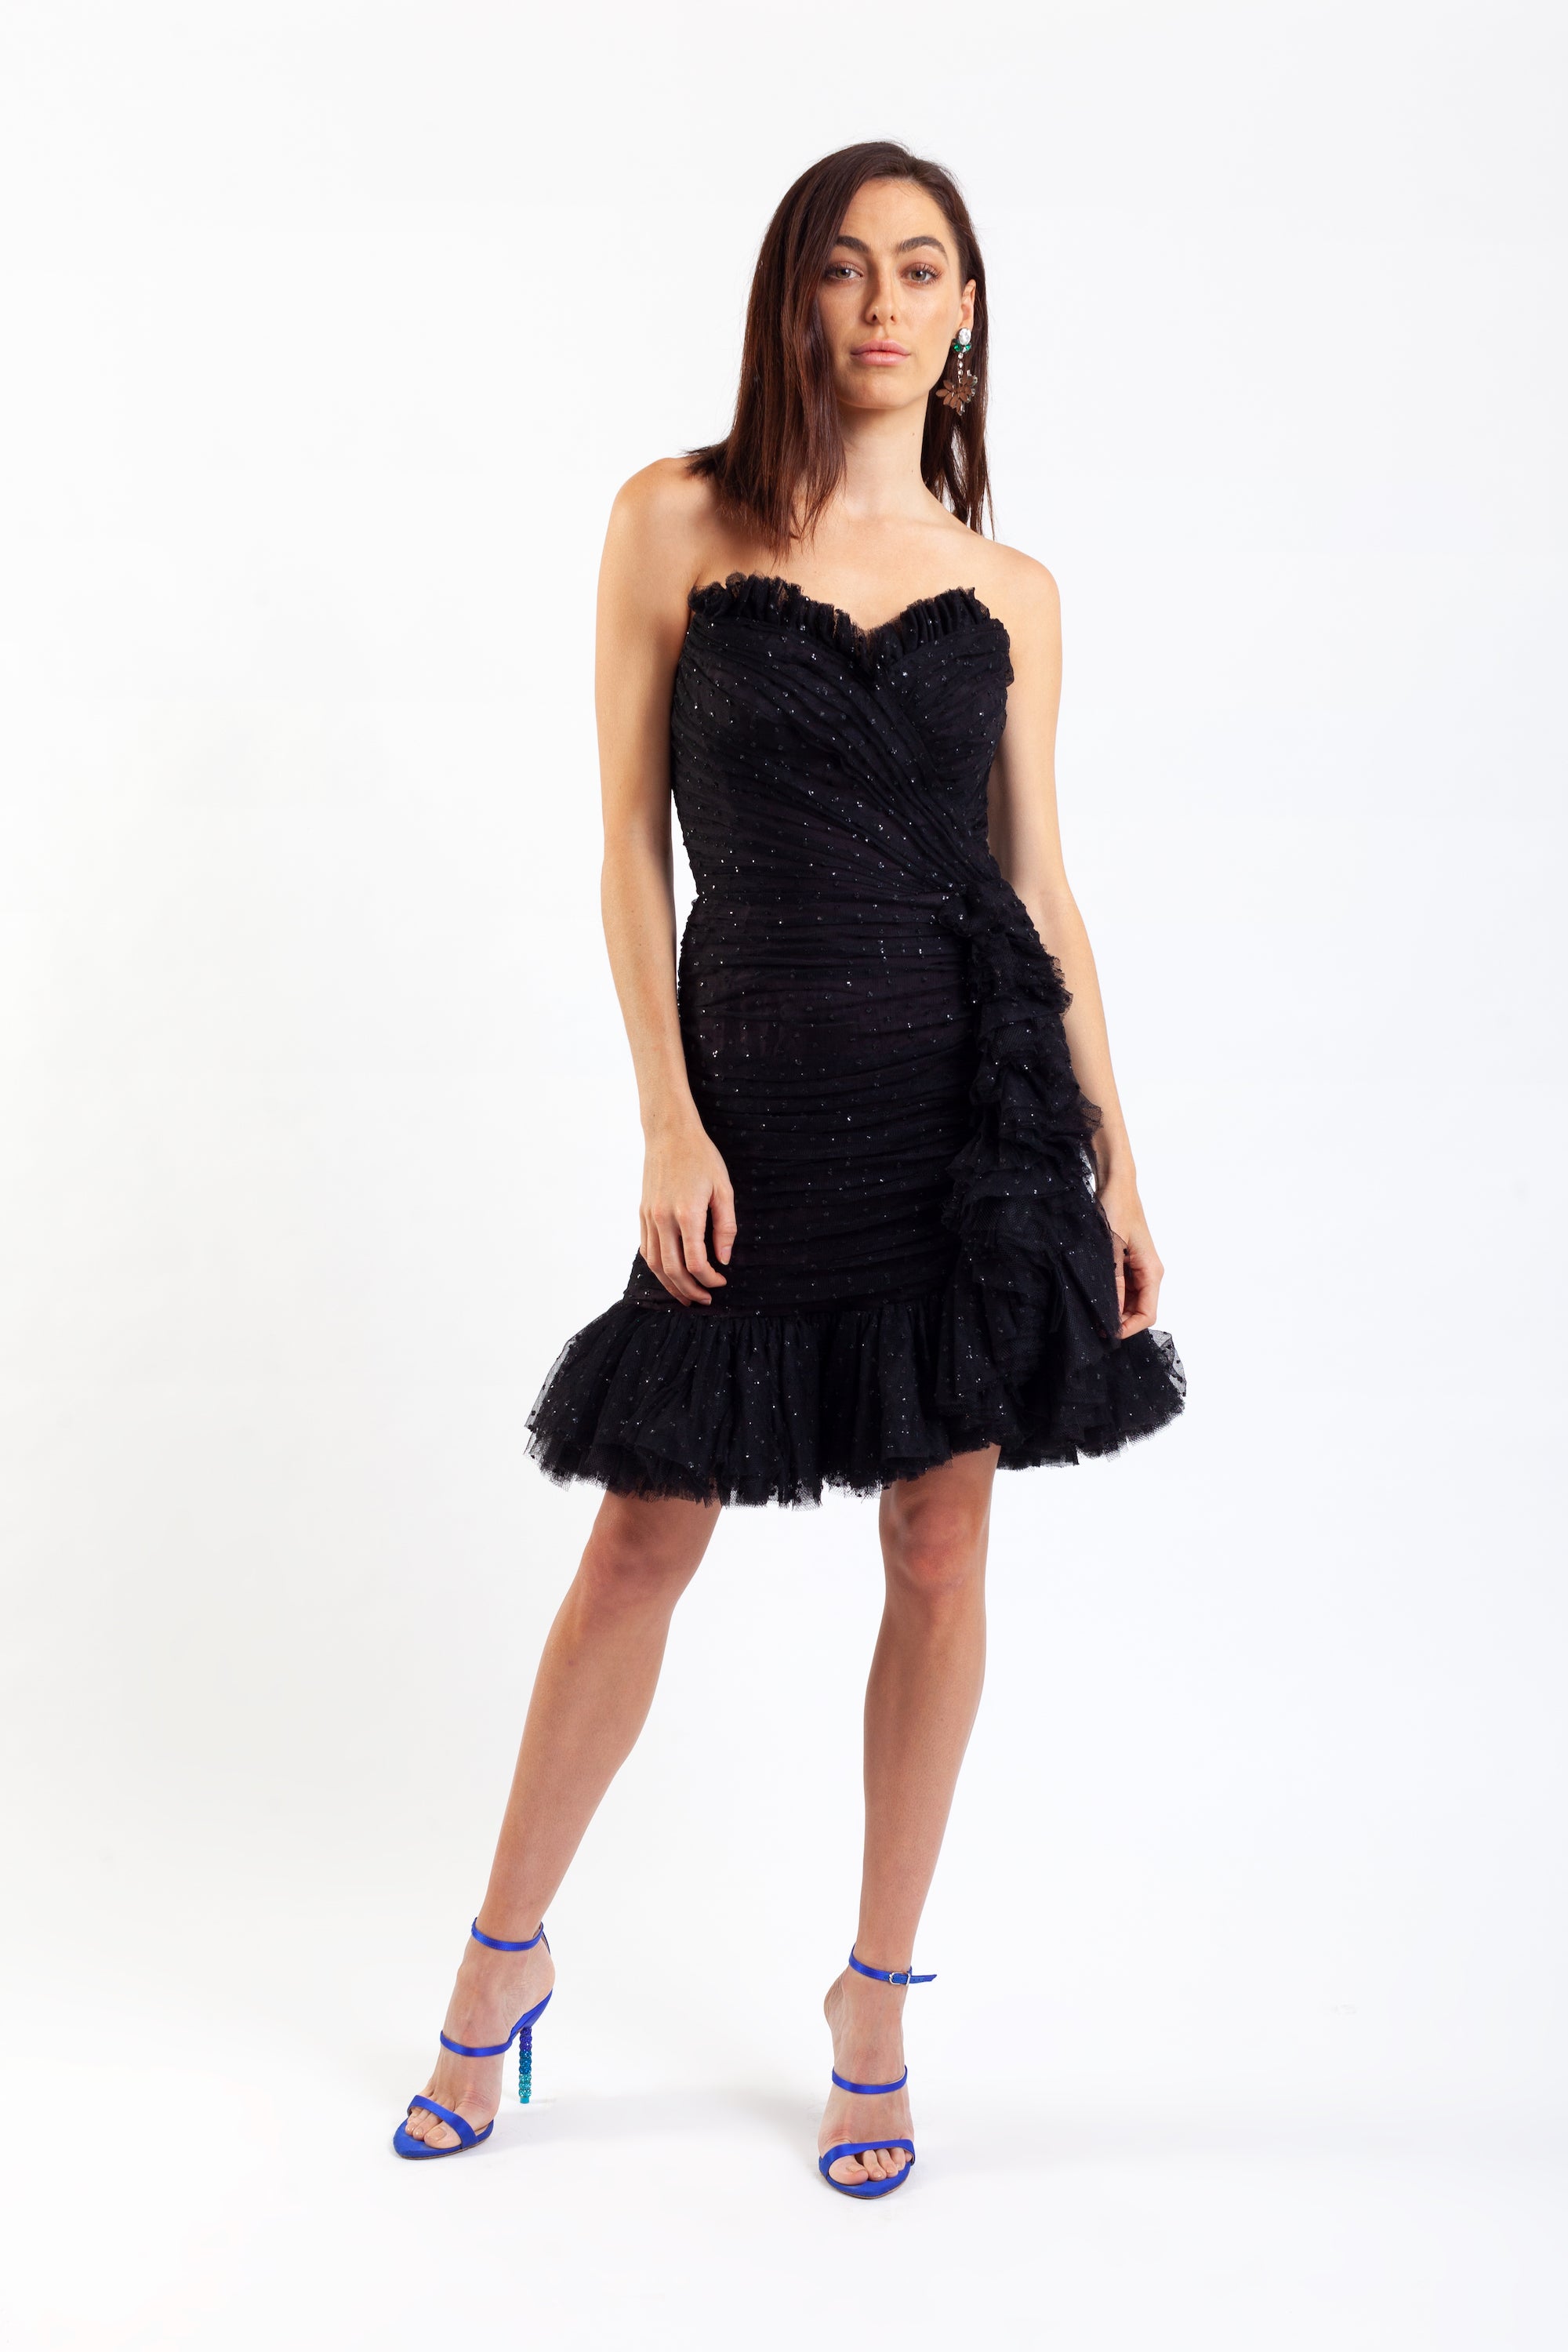 Lorcan Mullany <br> 80's strapless glitter tulle party dress